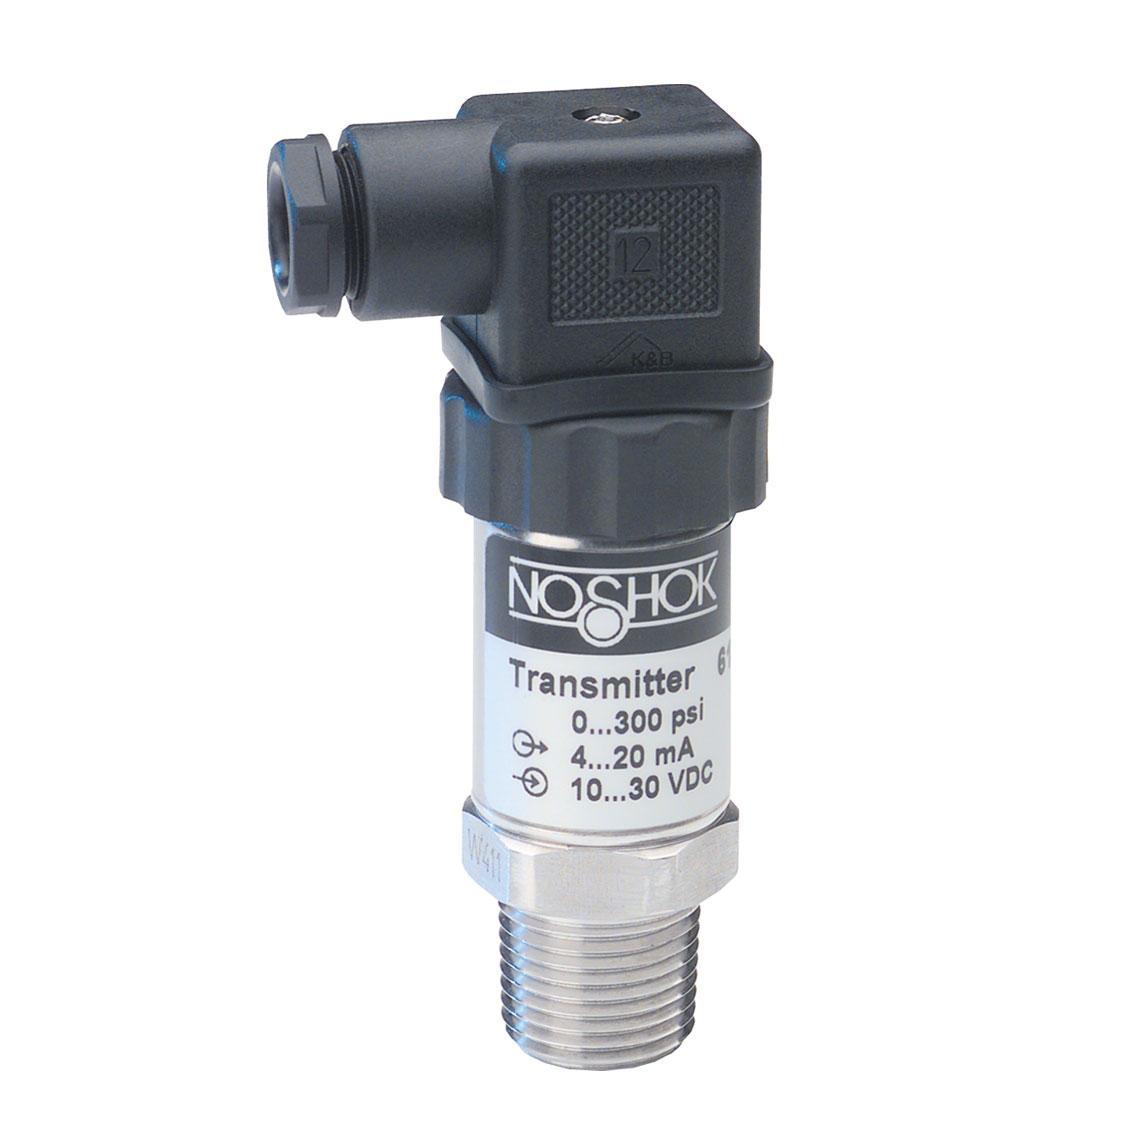 Noshok 615-3000-1-1-2-8-ST8 0 to 3,000 psig, 0.25% Accuracy (Best Fit Straight Line (BFSL)), 4 to 20 mA Output, 1/4'' National Pipe Thread (NPT) Male Pressure Transducer with DIN EN 175301-803 Form A Electrical Connection and 0.8 mm Stainless Steel Threaded Orifice